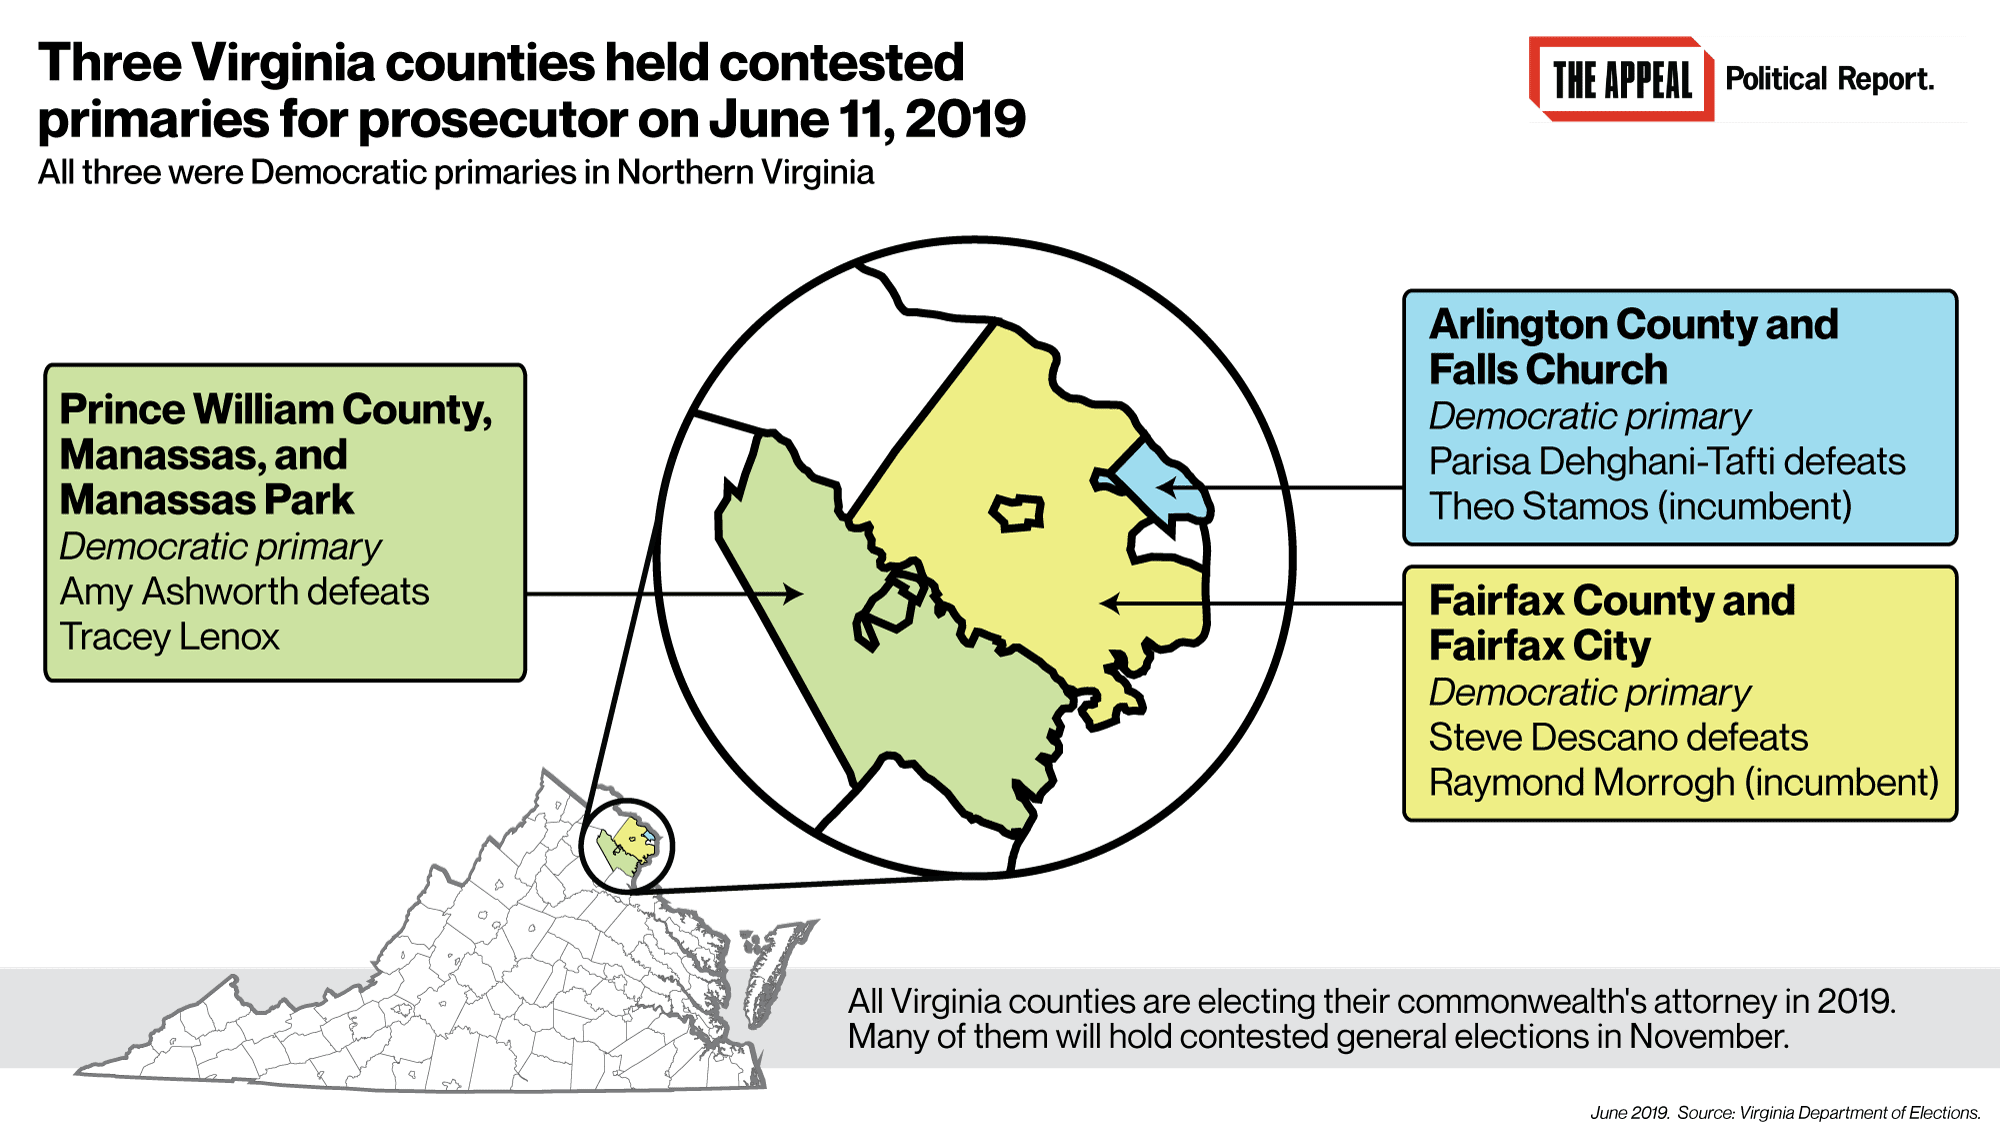 Results of Virginia elections on June 11, 2019